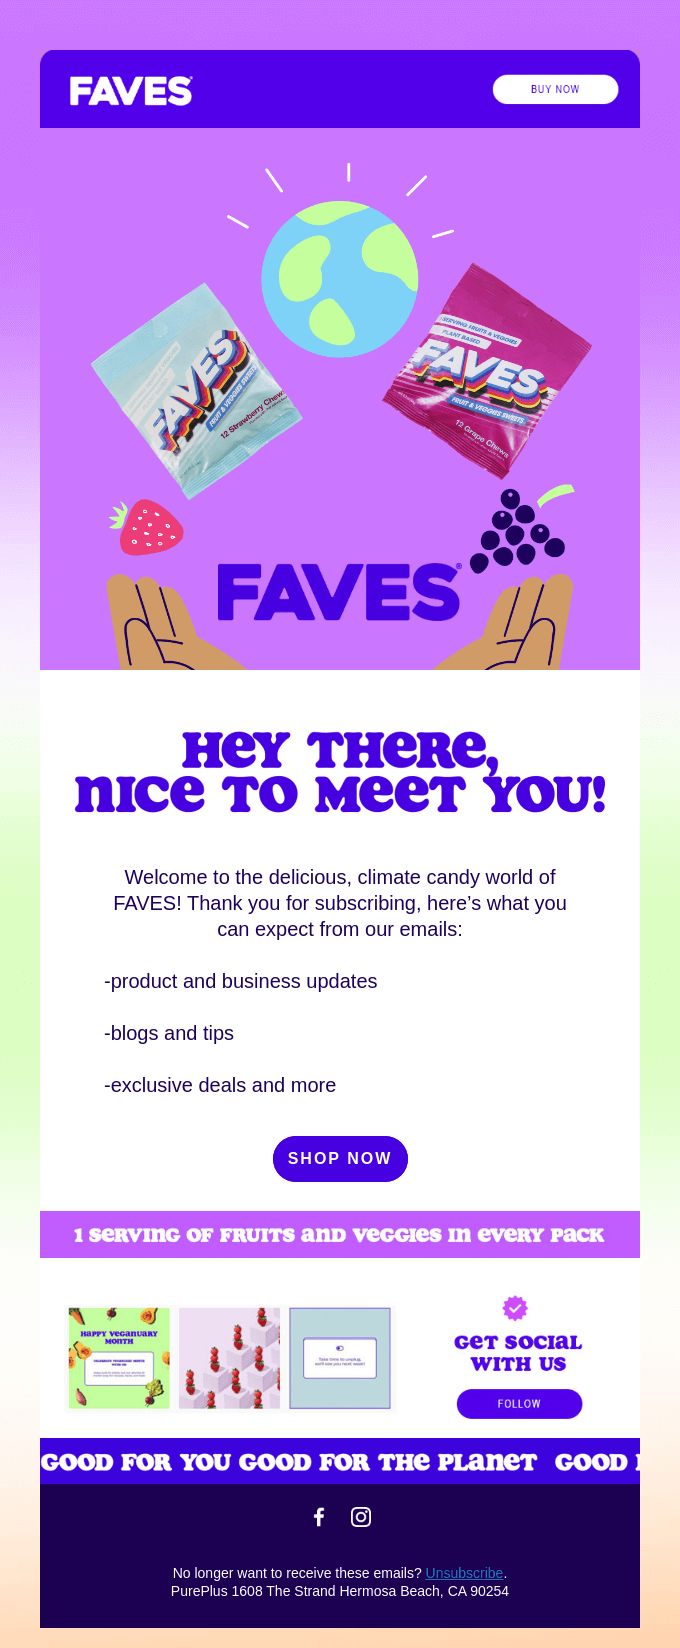  Welcome email from Faves 